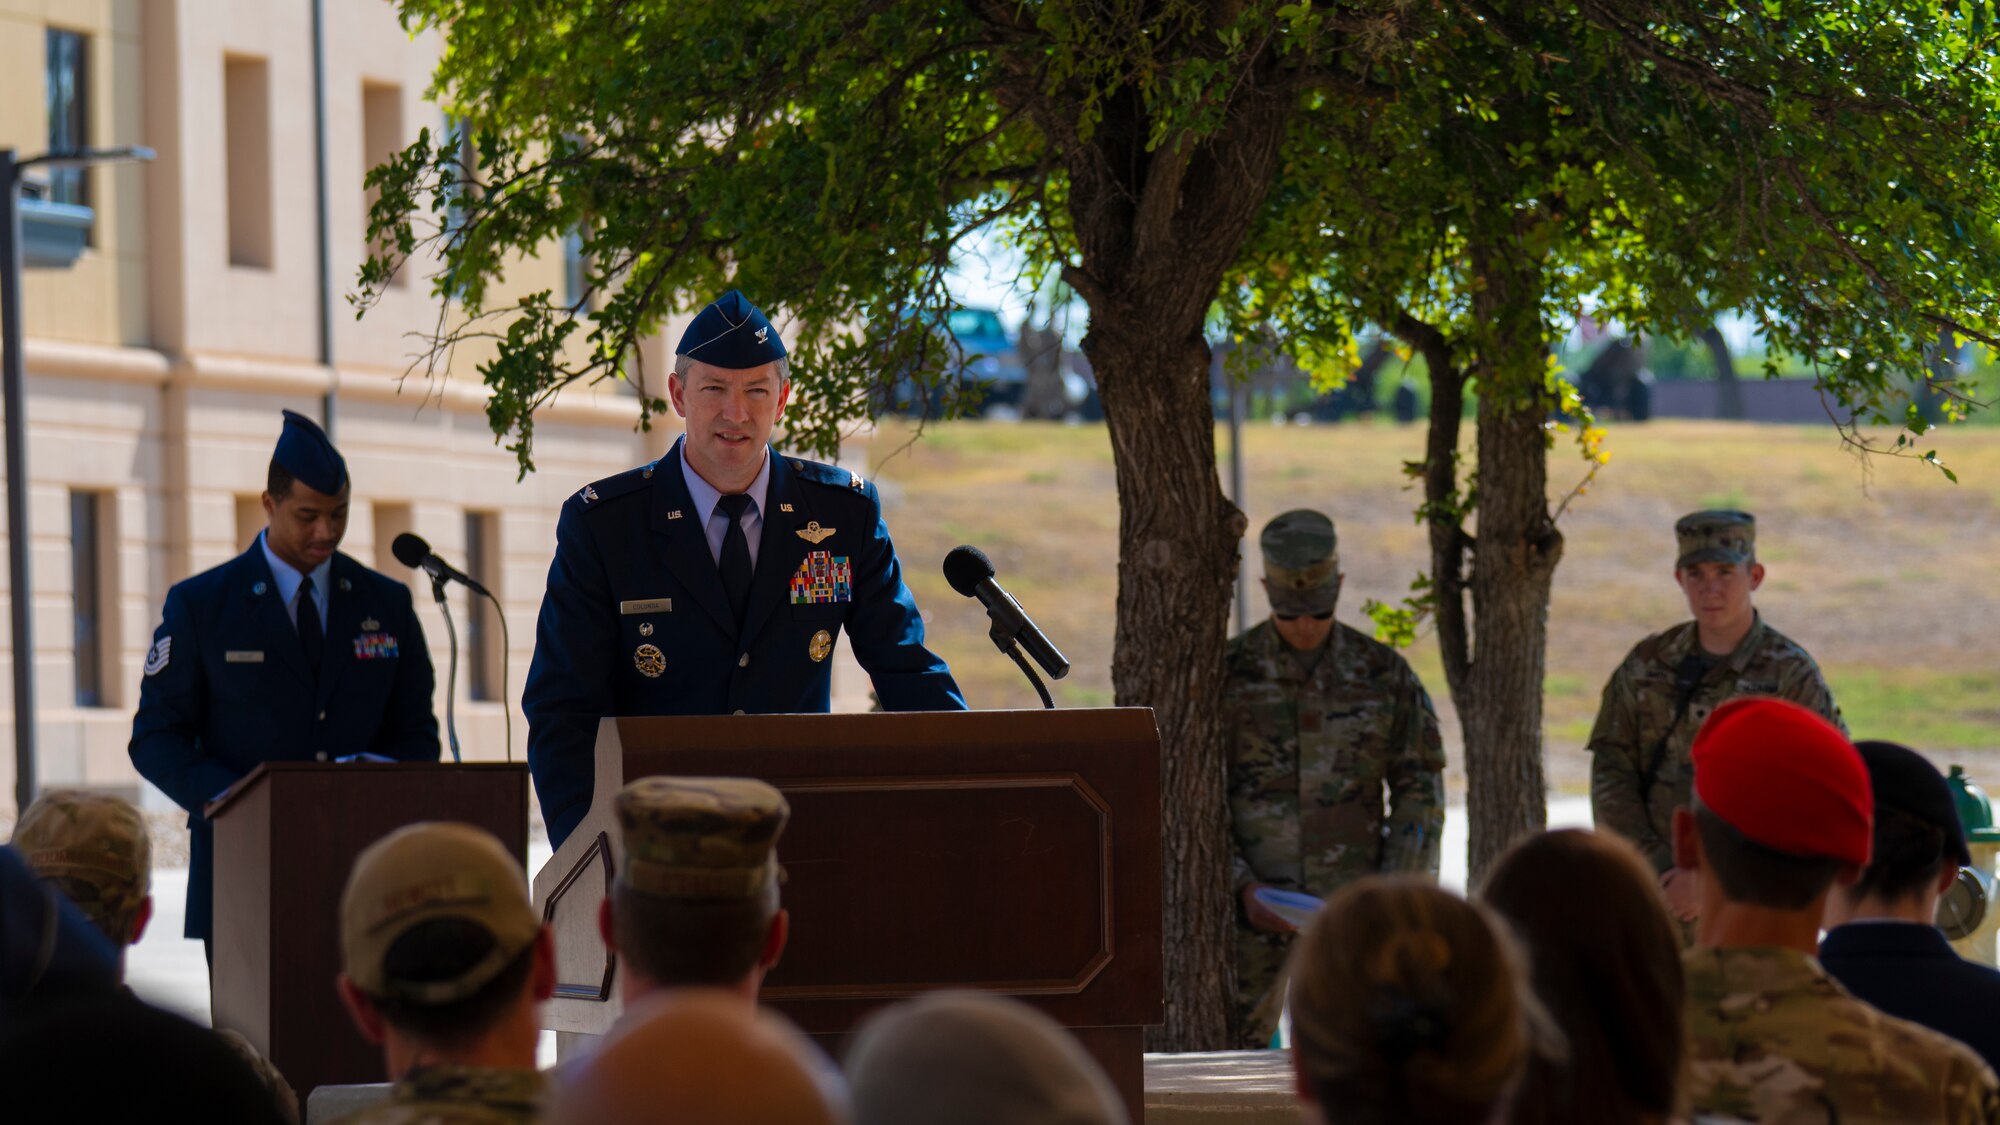 U.S. Air Force Col. Nathan Colunga, Special Warfare Training Wing commander, addresses members of the SWTW during the SWTW change of command ceremony at Joint Base San Antonio-Chapman Training Annex, Texas, July 11, 2022. Colunga comes to the SWTW from Royal Air Force Mildenhall, where he was the vice commander for the 352nd Special Operations Wing.